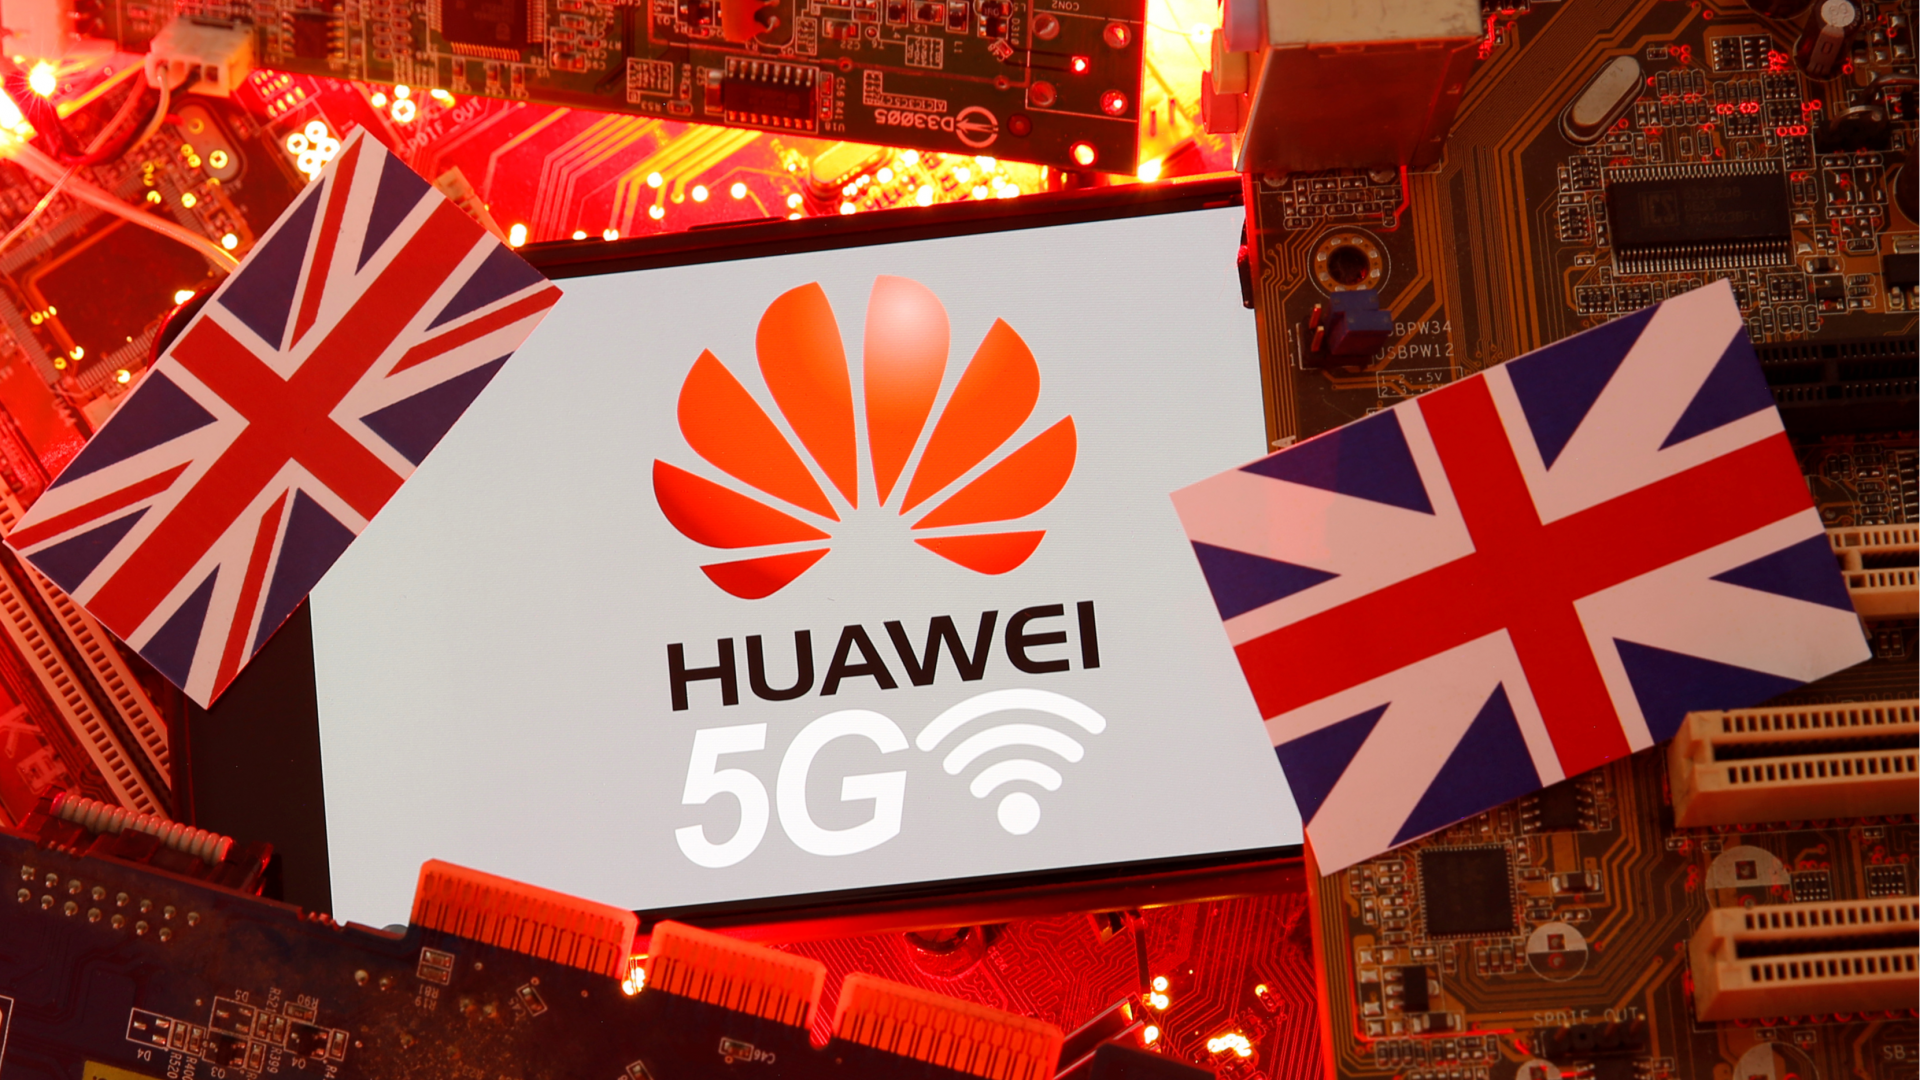 uk lawmakers warns huawei about being axed for colluding with beijing